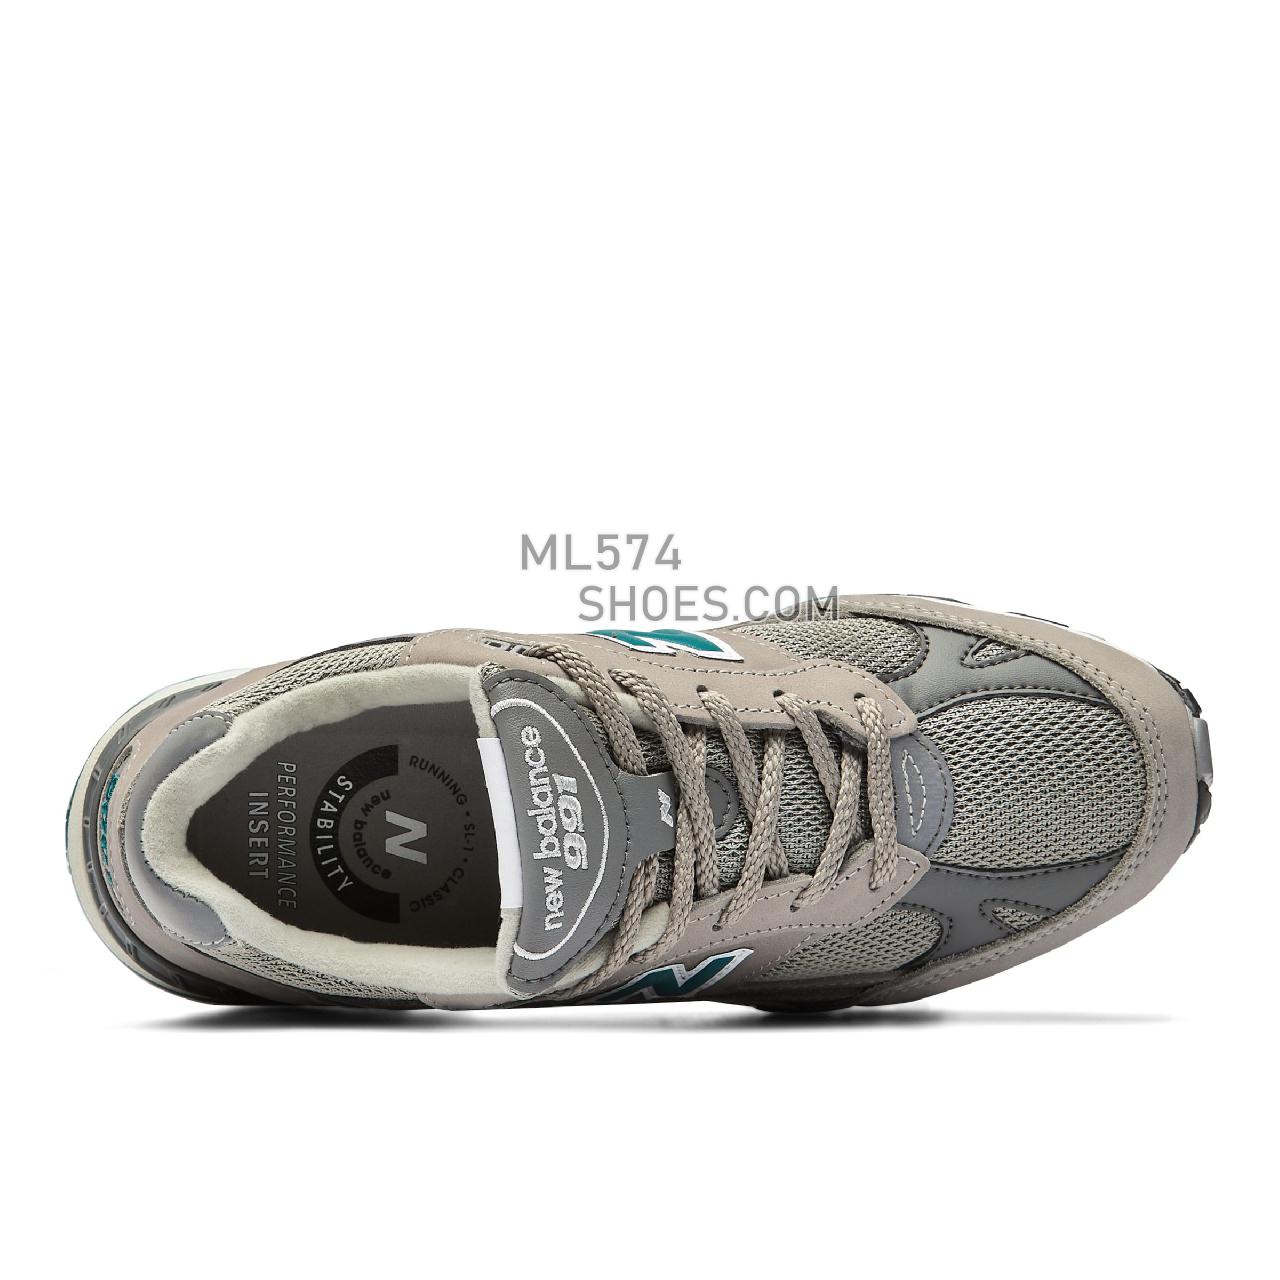 New Balance Made in UK 991 - Women's Made in USA And UK Sneakers - Grey with Emerald and White - W991ANI